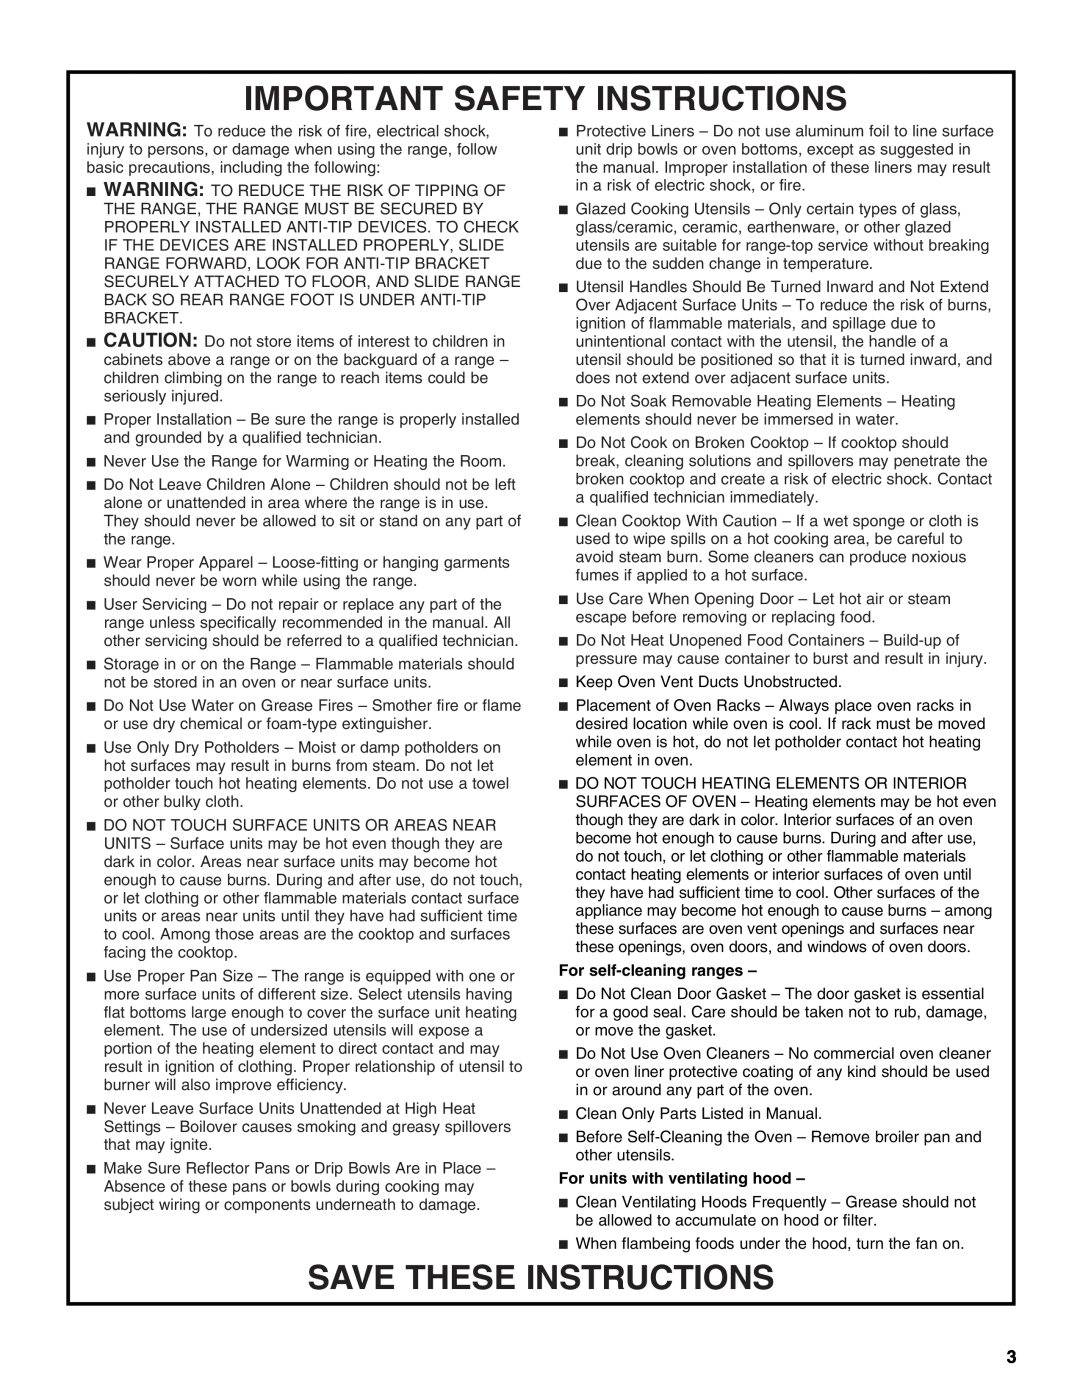 Maytag W10321012A warranty Important Safety Instructions, Save These Instructions, For self-cleaningranges 